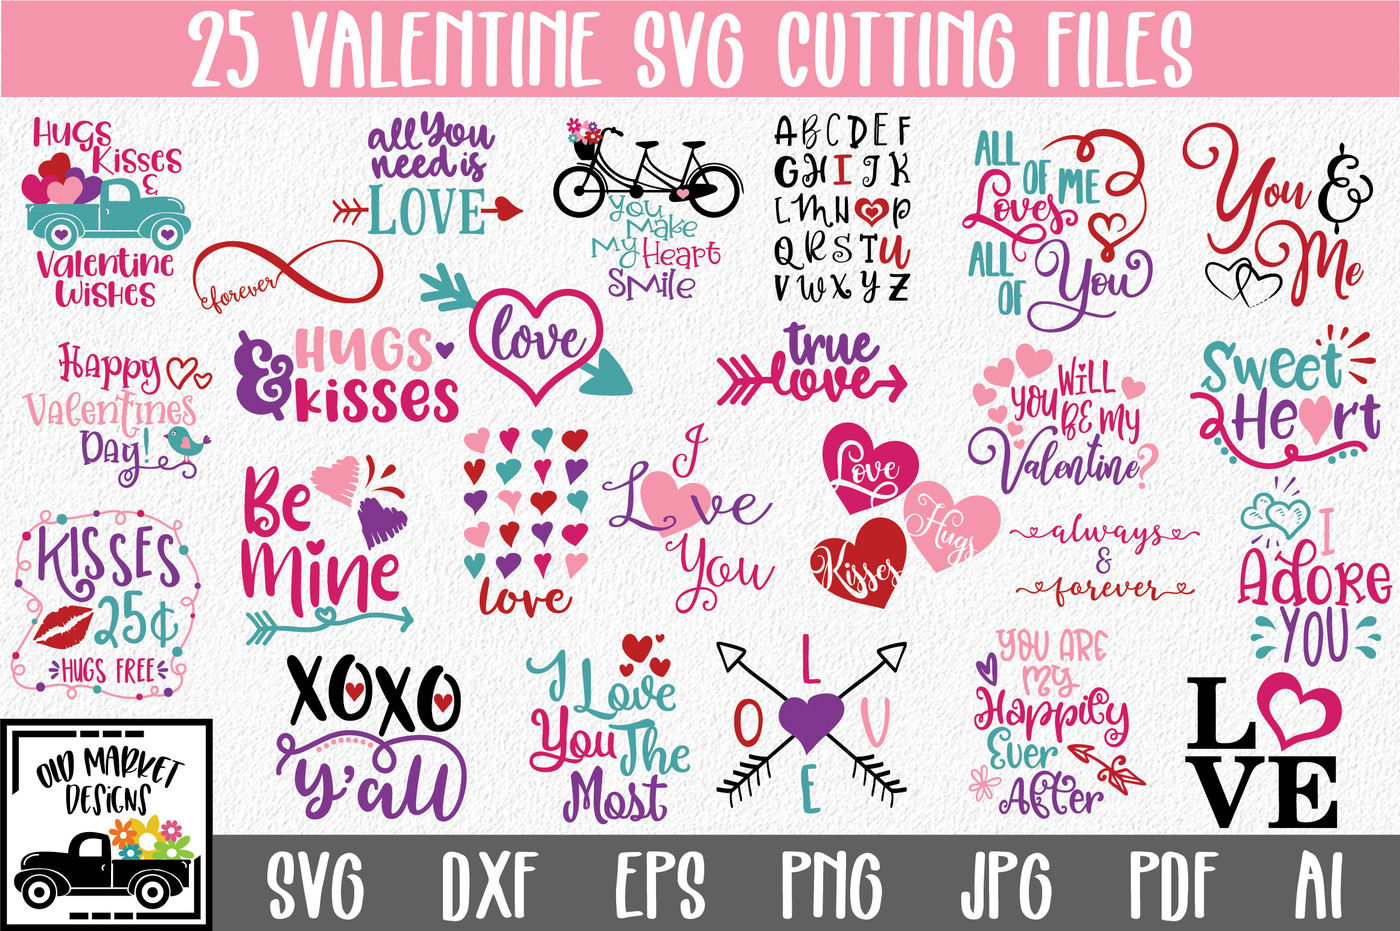 Valentines Day SVG Bundle with 25 Valentine SVG Cut Files-DXF-EPS By